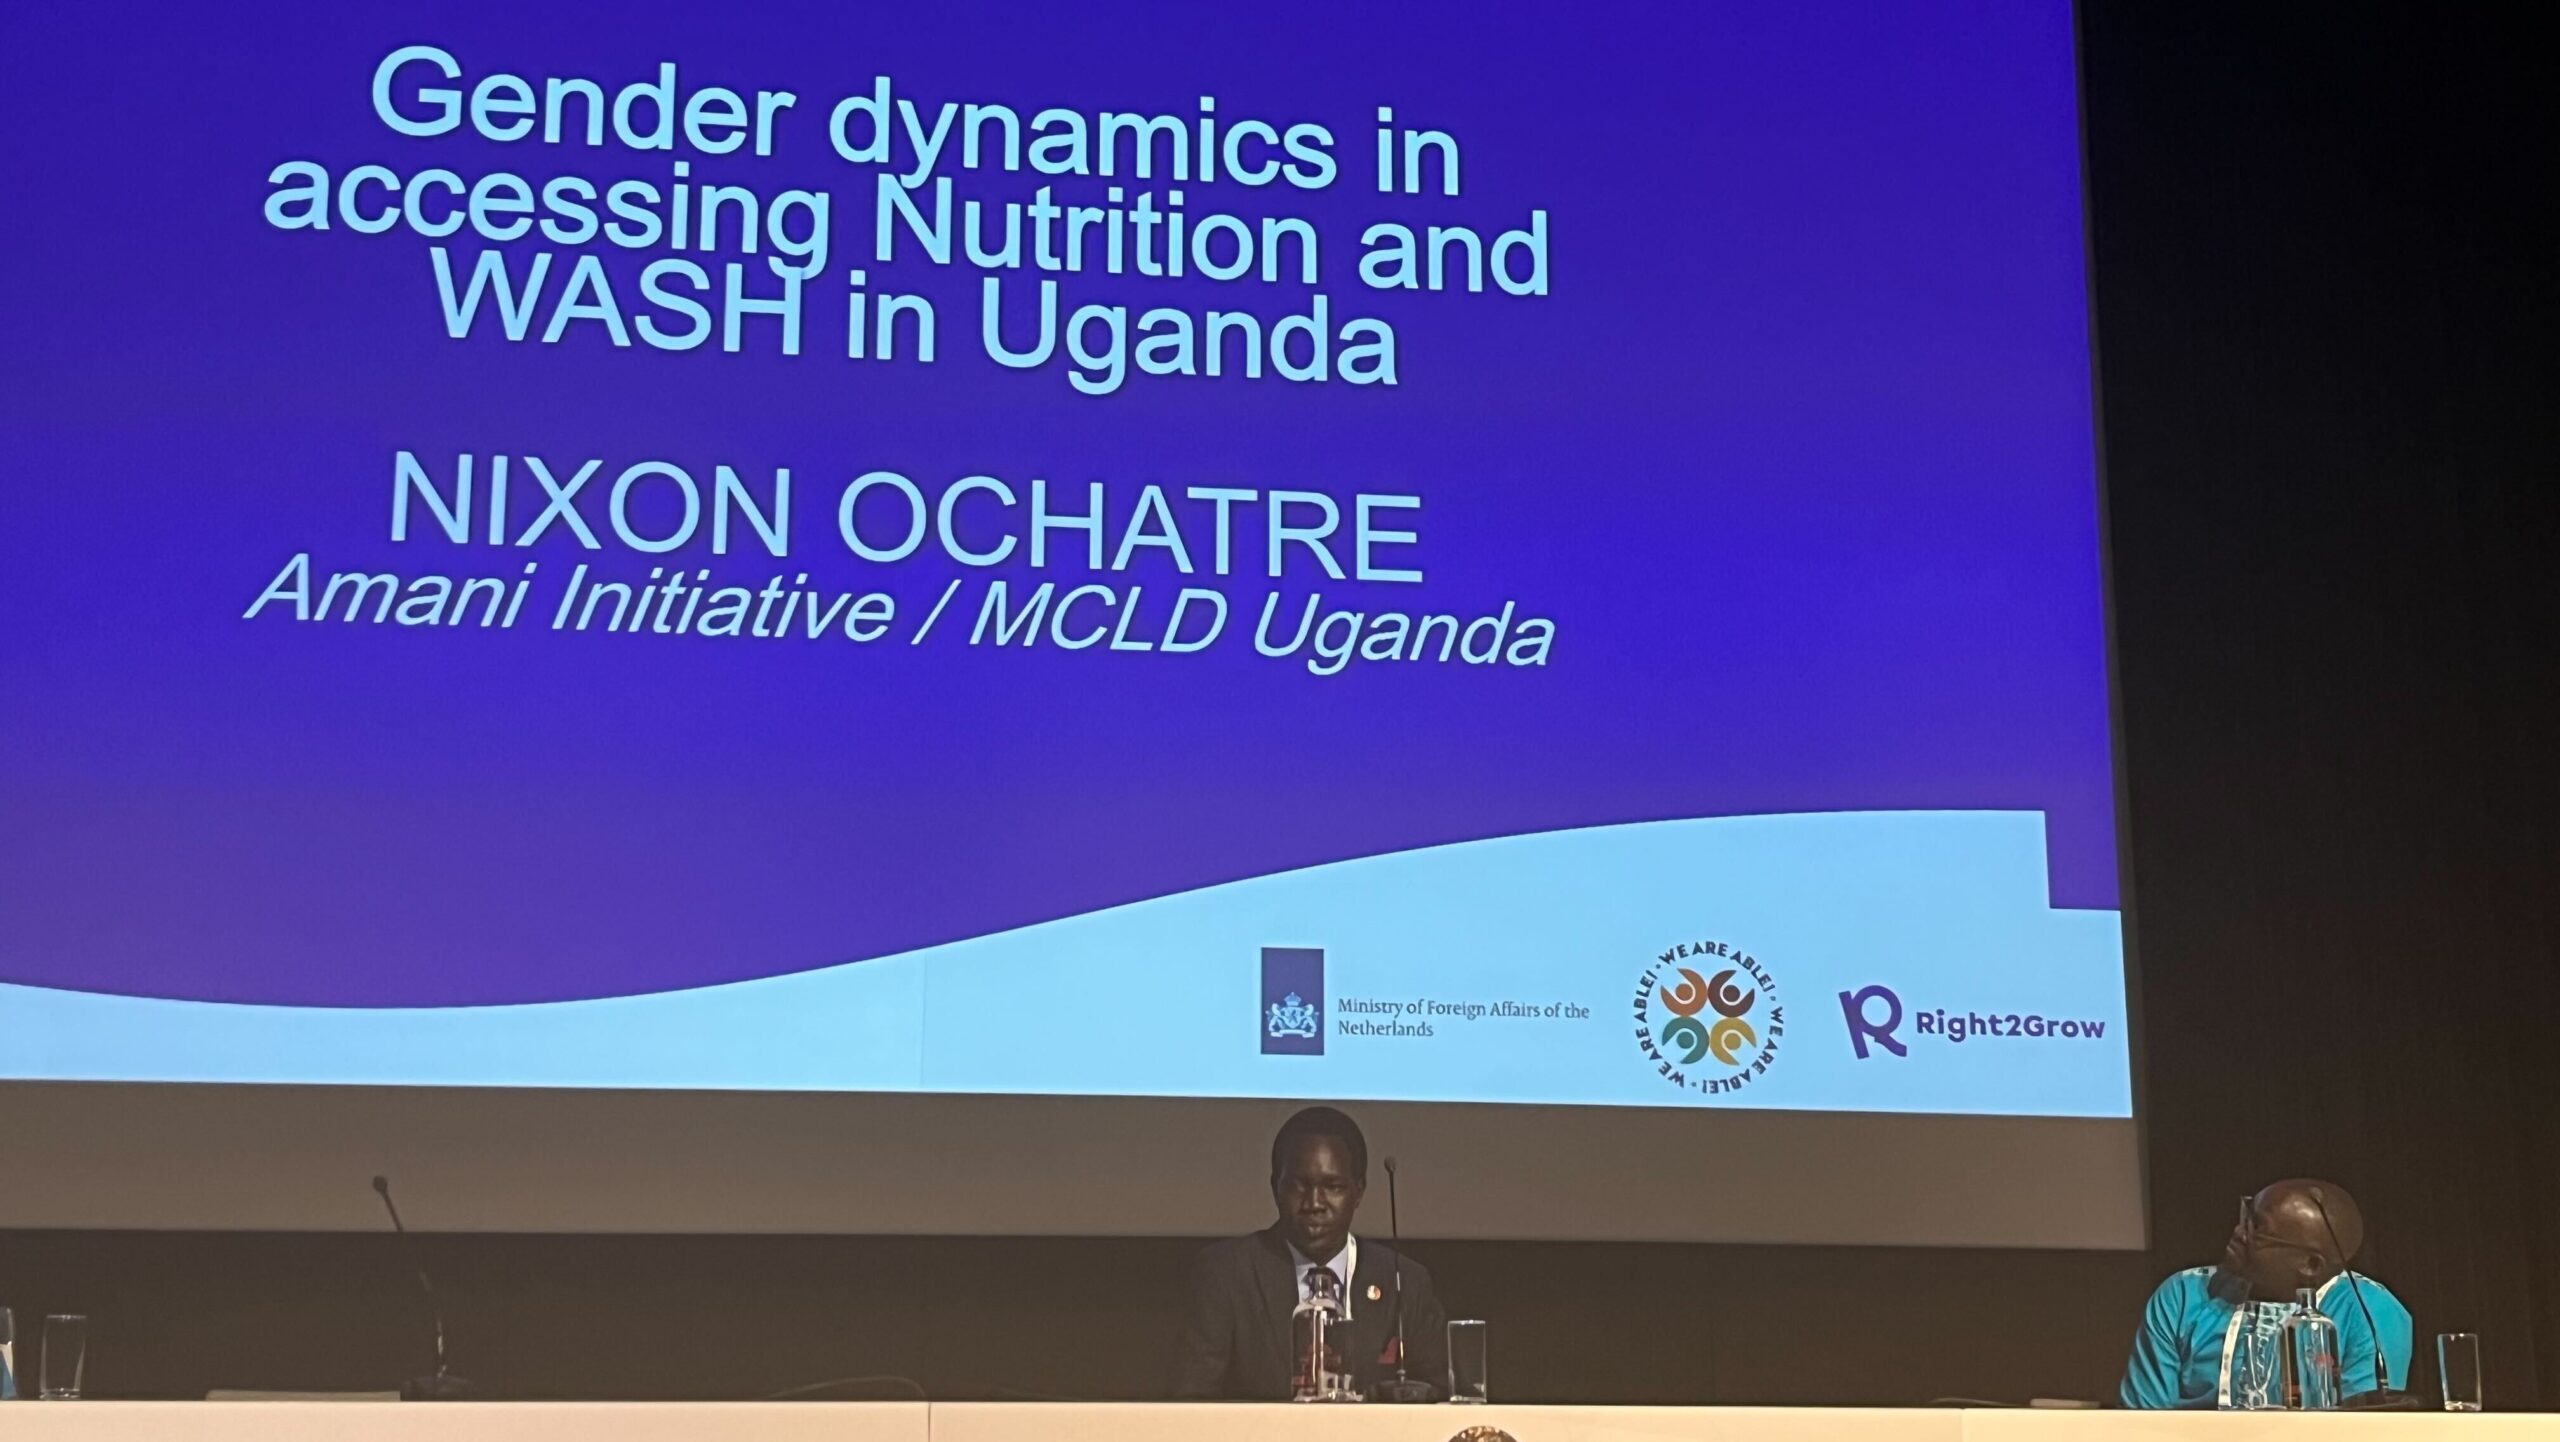 Breaking the Silos – Nixon Ochatre at the Micronutrient Global Conference